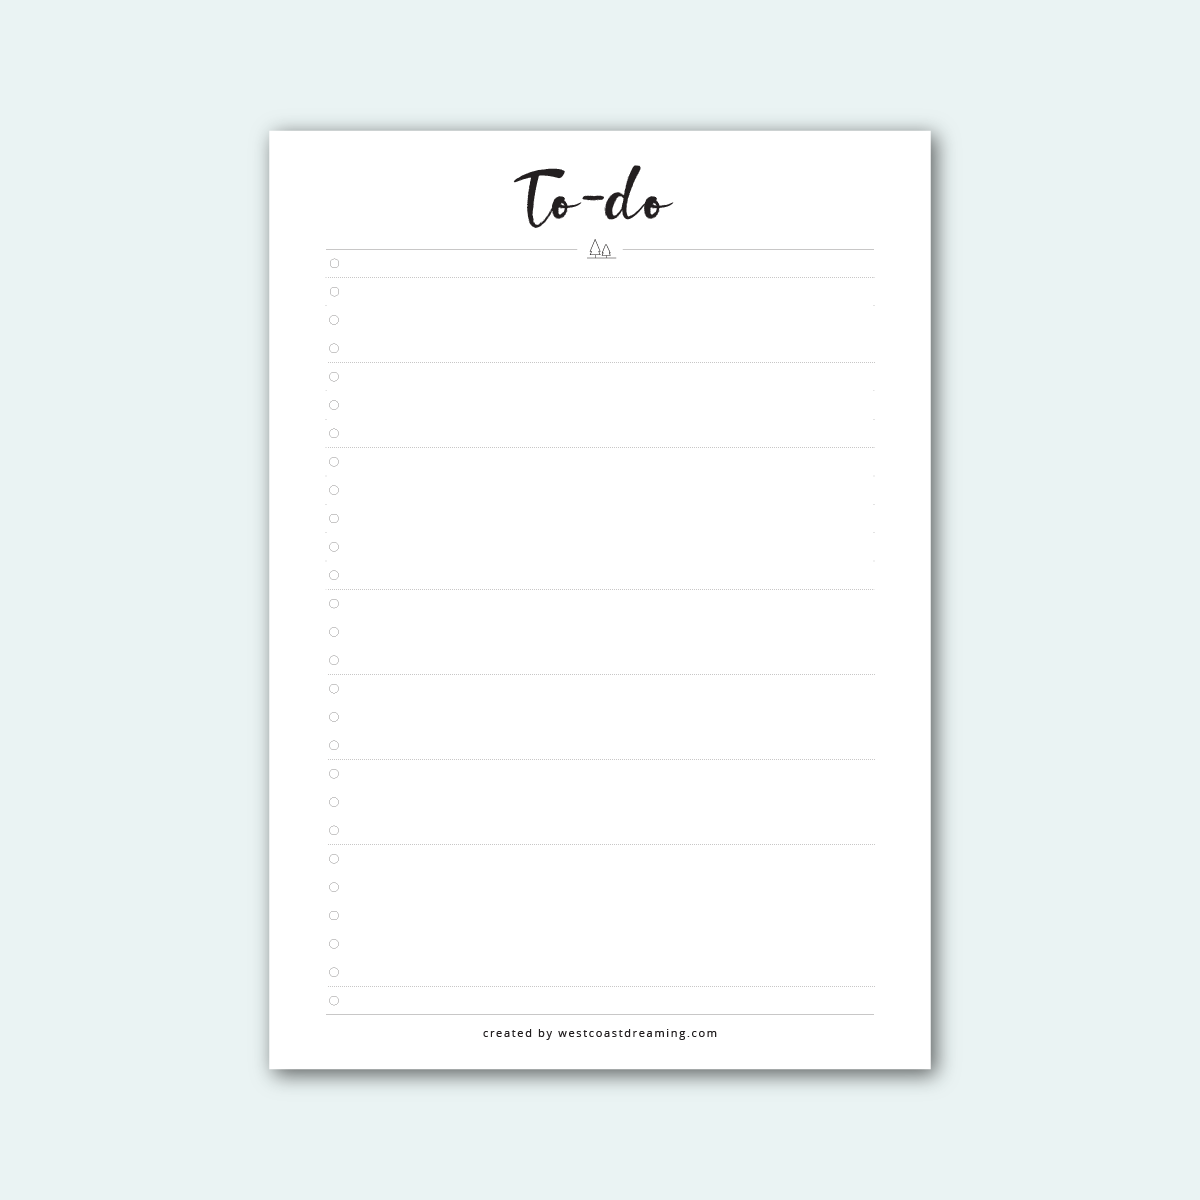 To-do pages